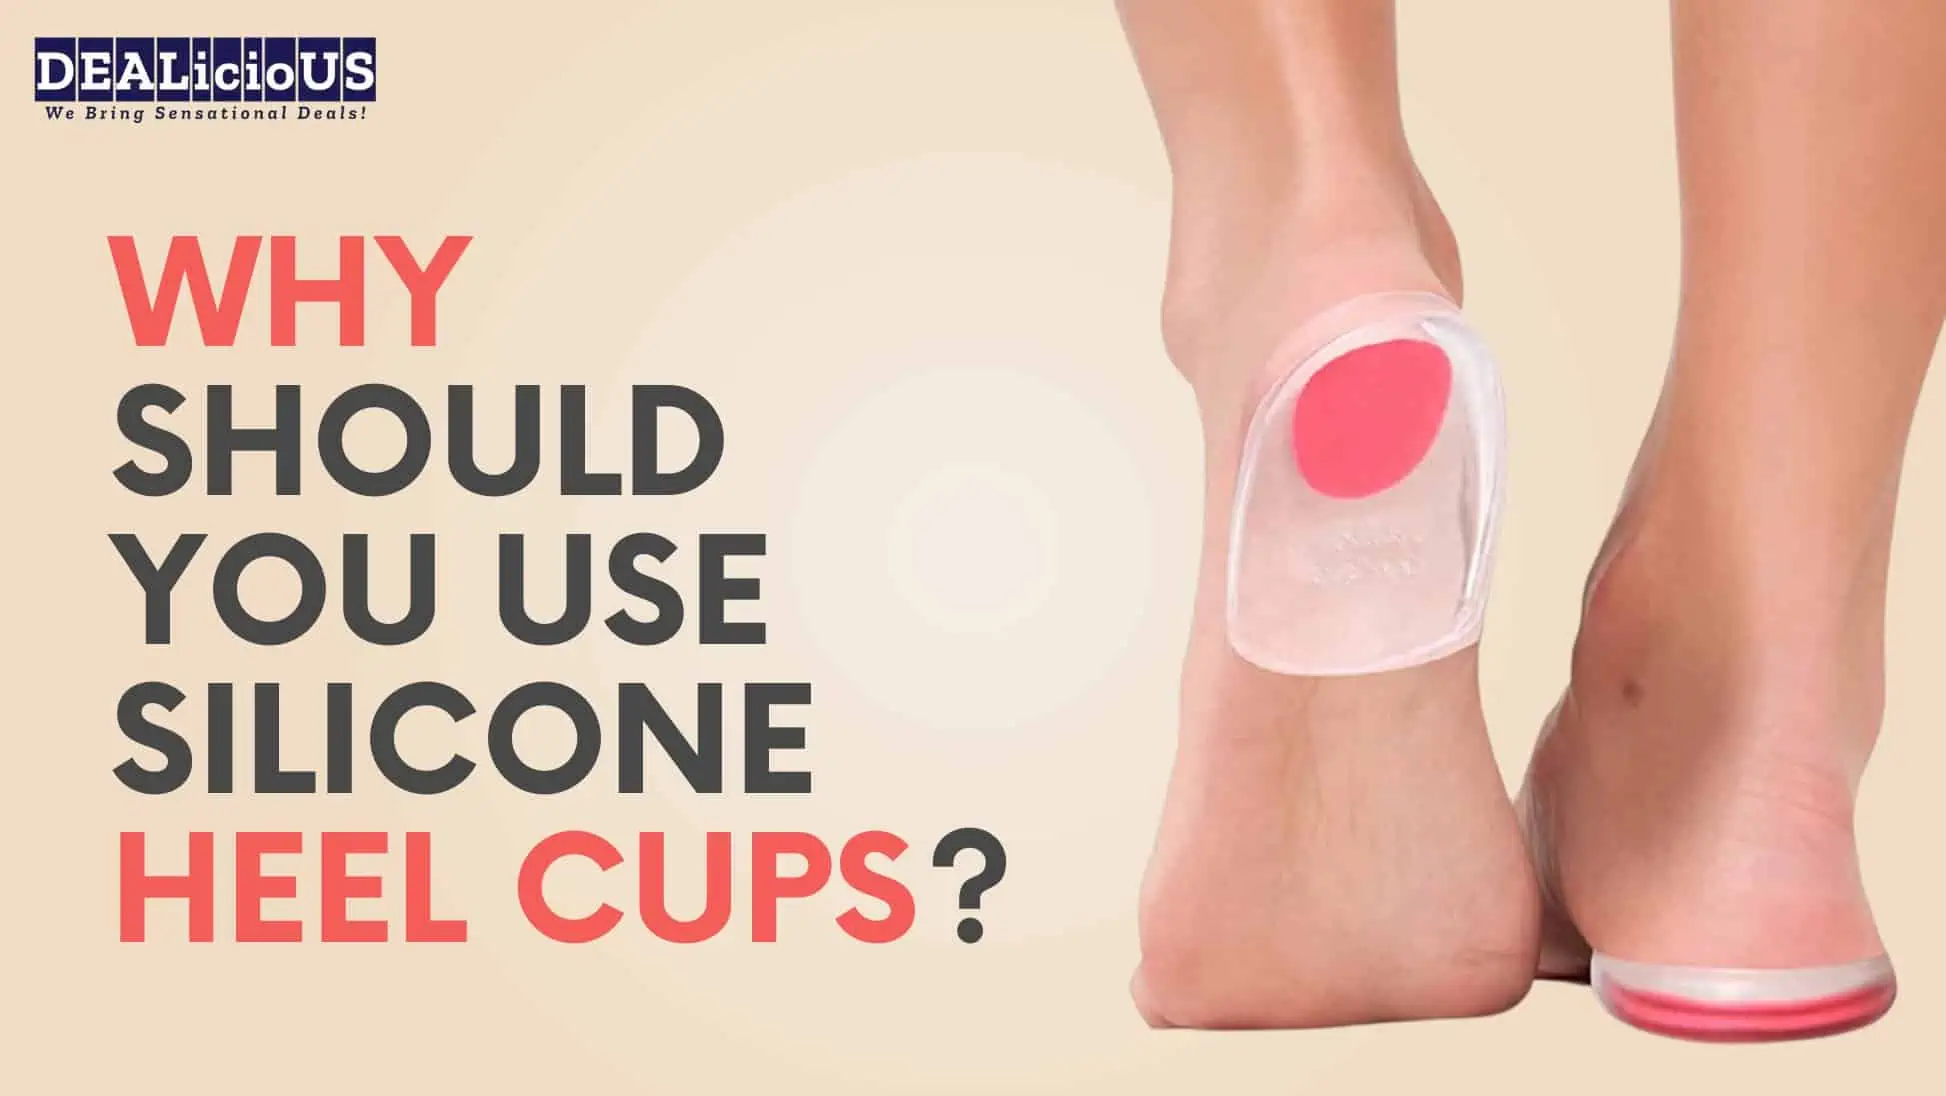 Why should you use silicone heel cups?